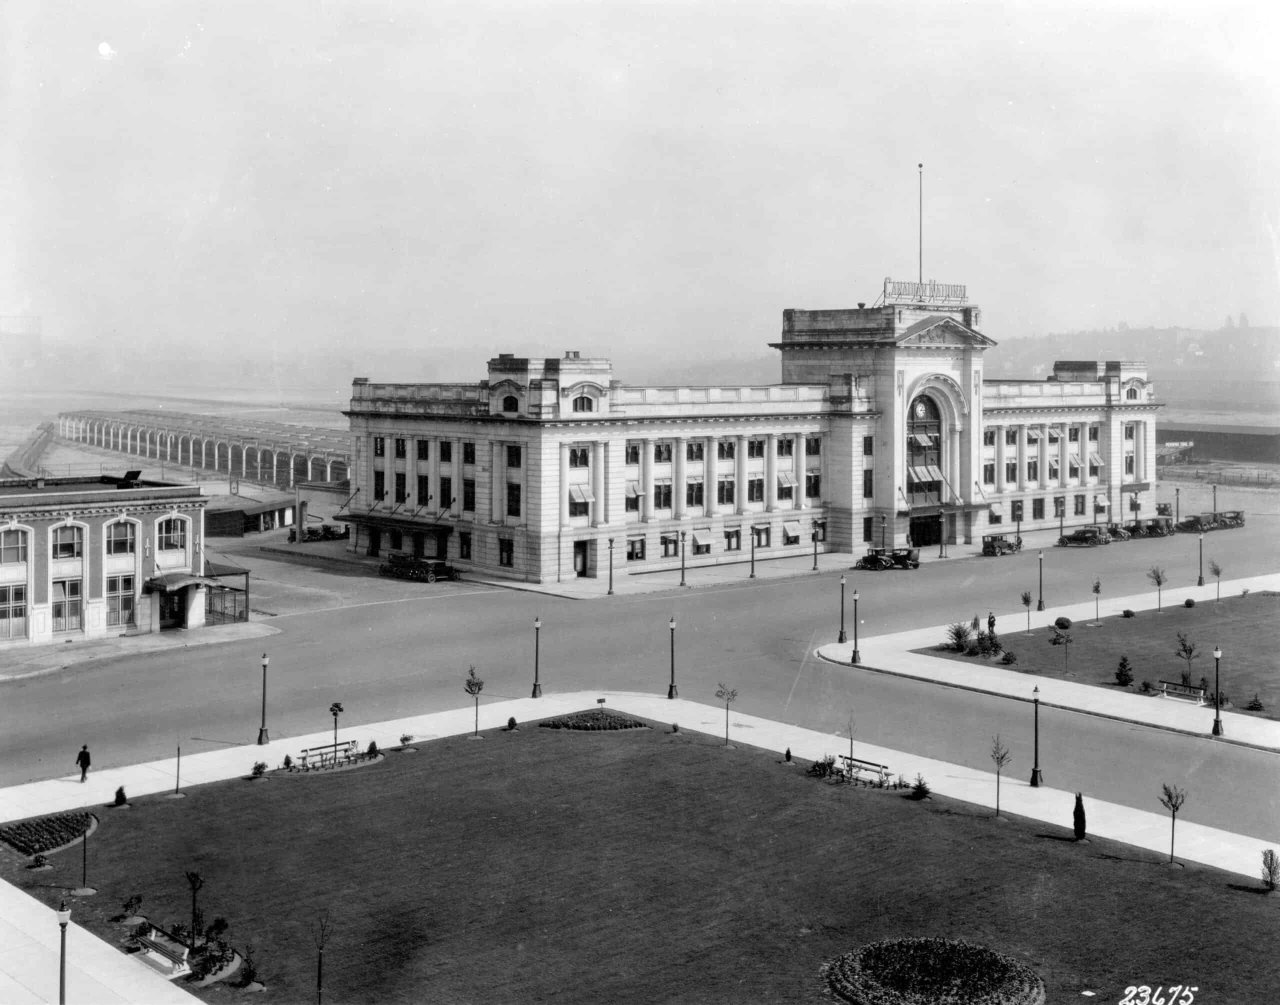 Exterior of the Canadian National Railway station on Main Street, 1932. City of Vancouver Archives, Can P23.1.